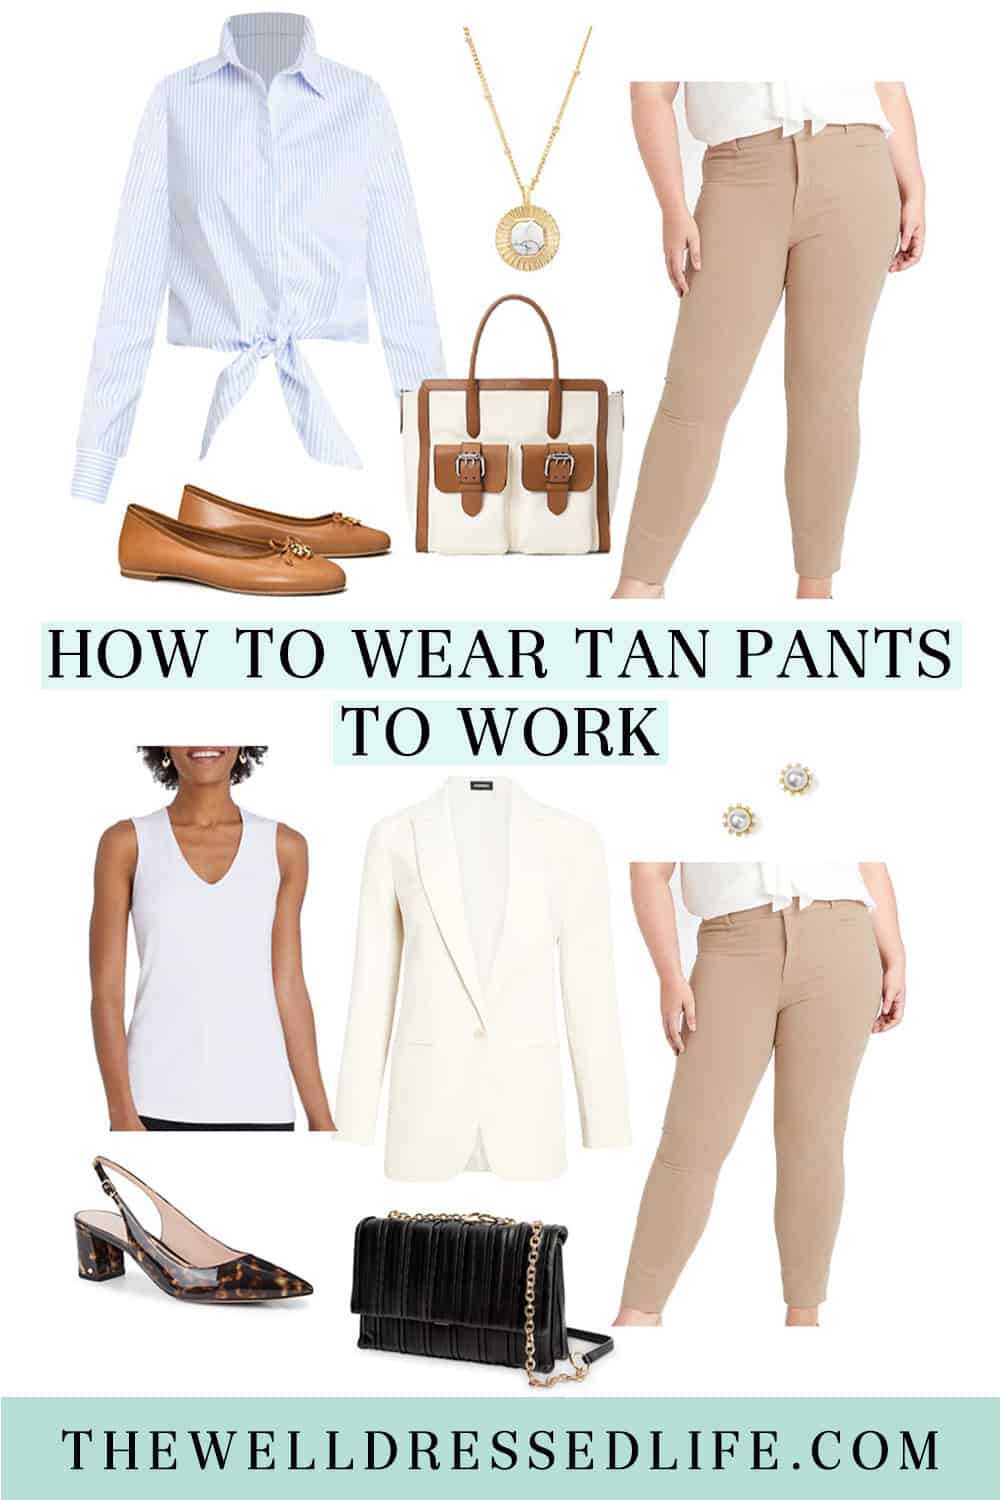 What To Wear With Tan Pants Women?